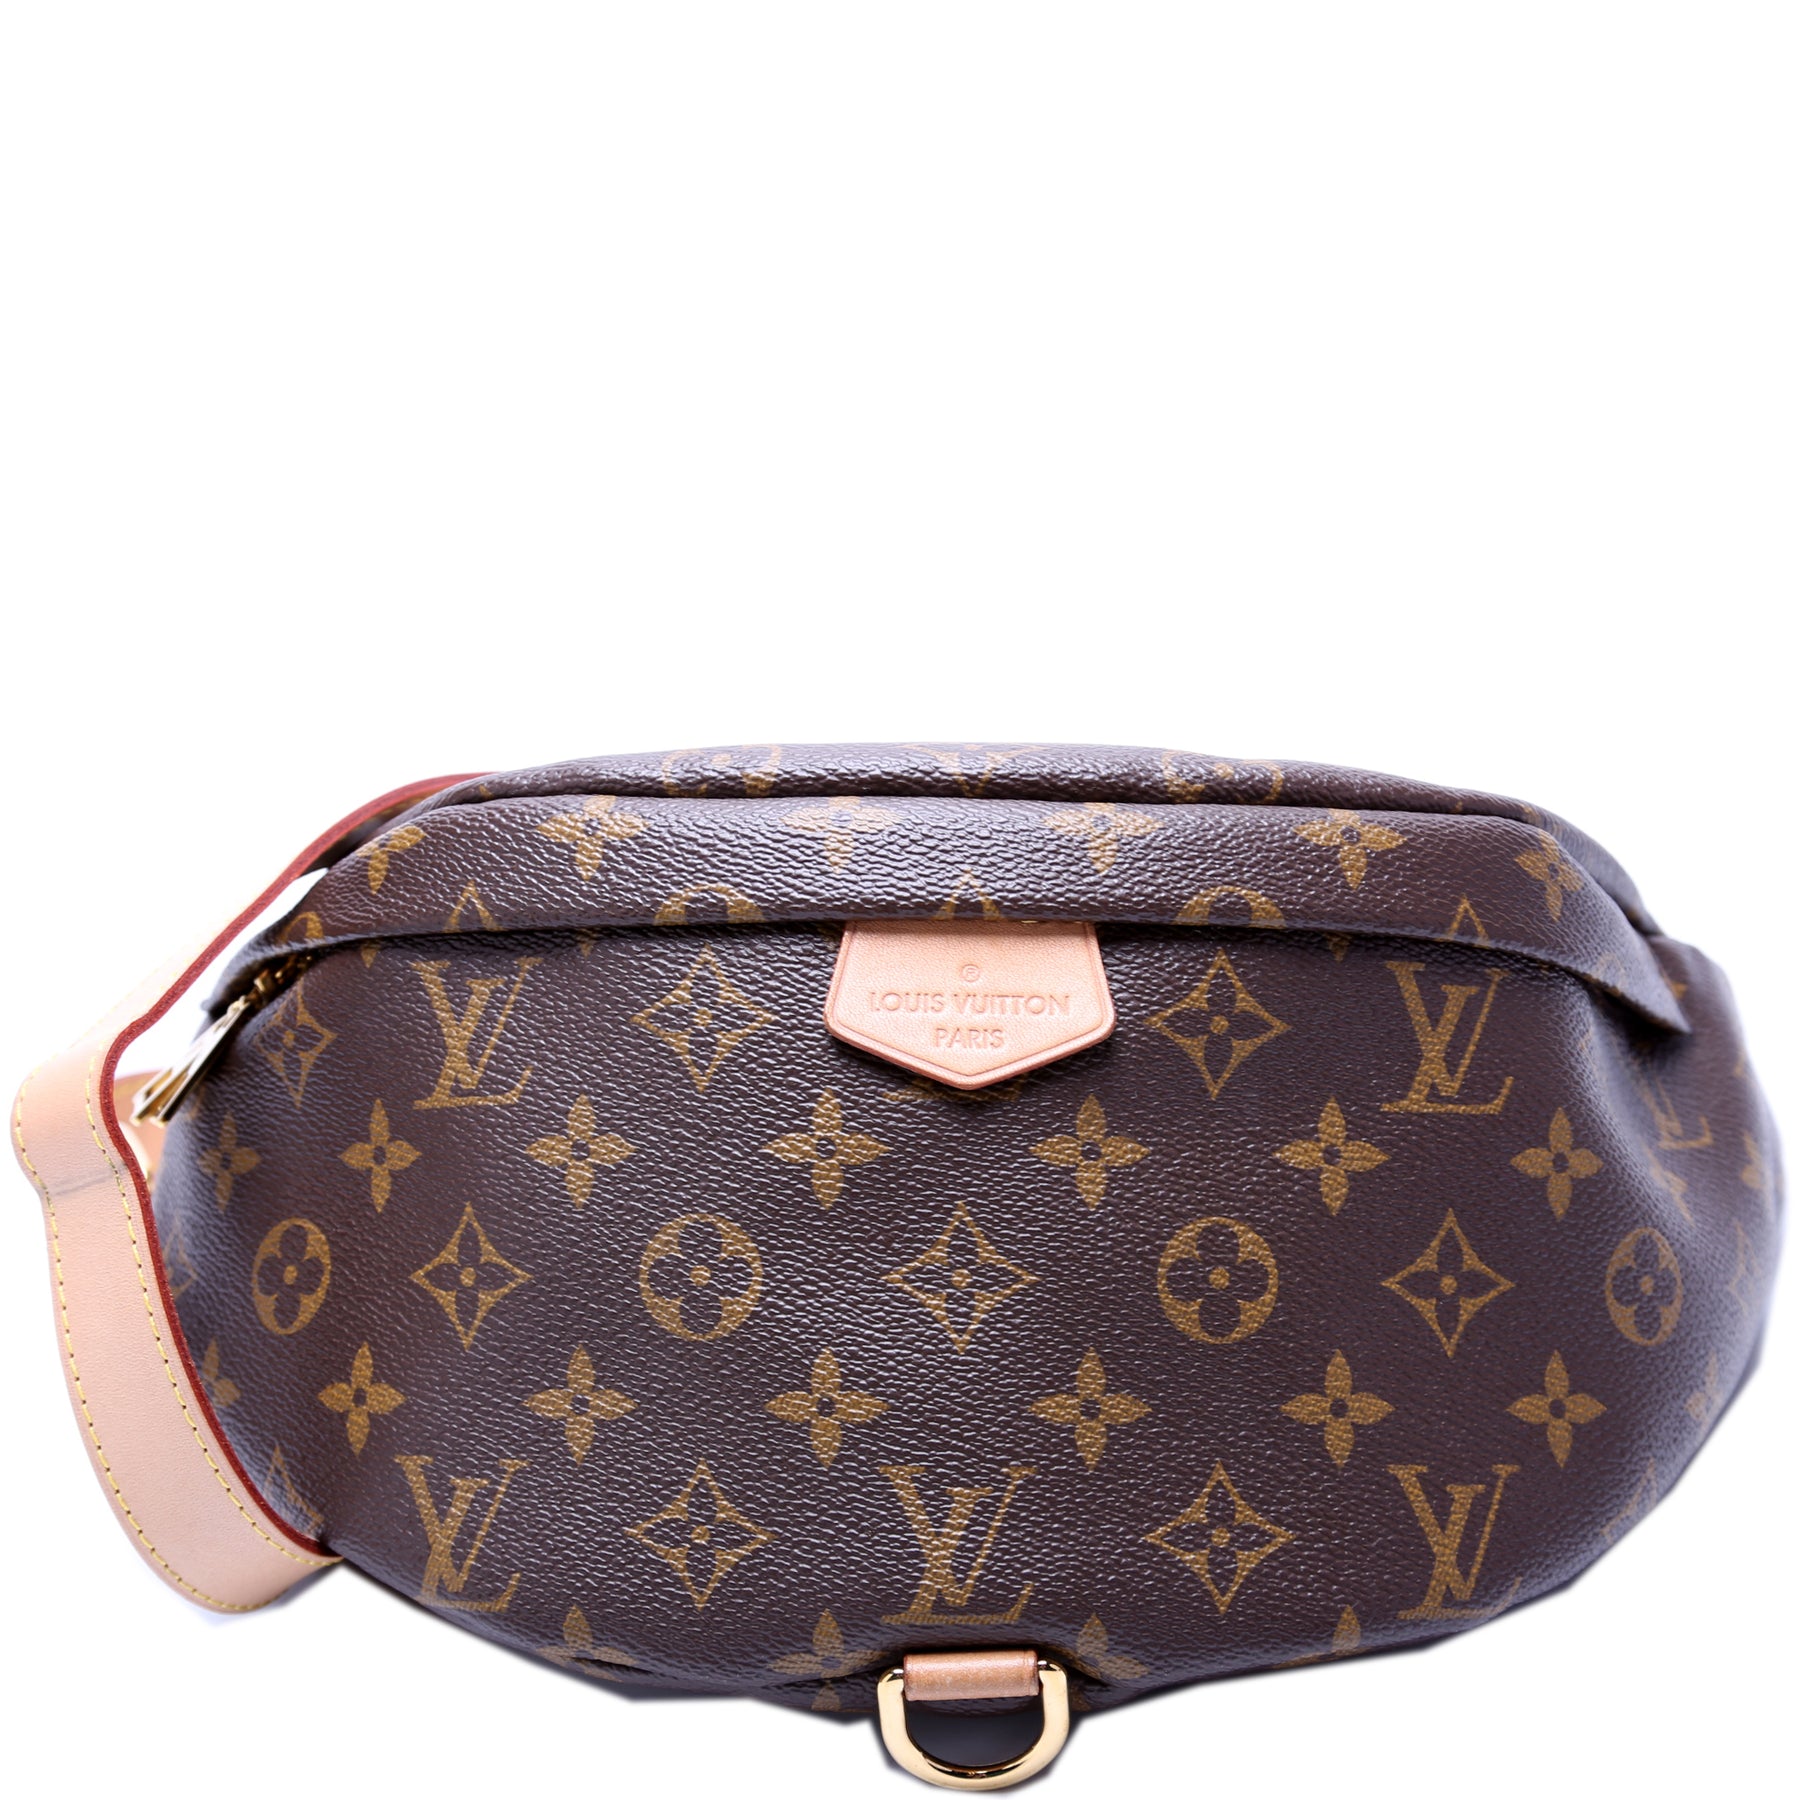 Louis Vuitton Bumbag in monogram - The House of Authentic